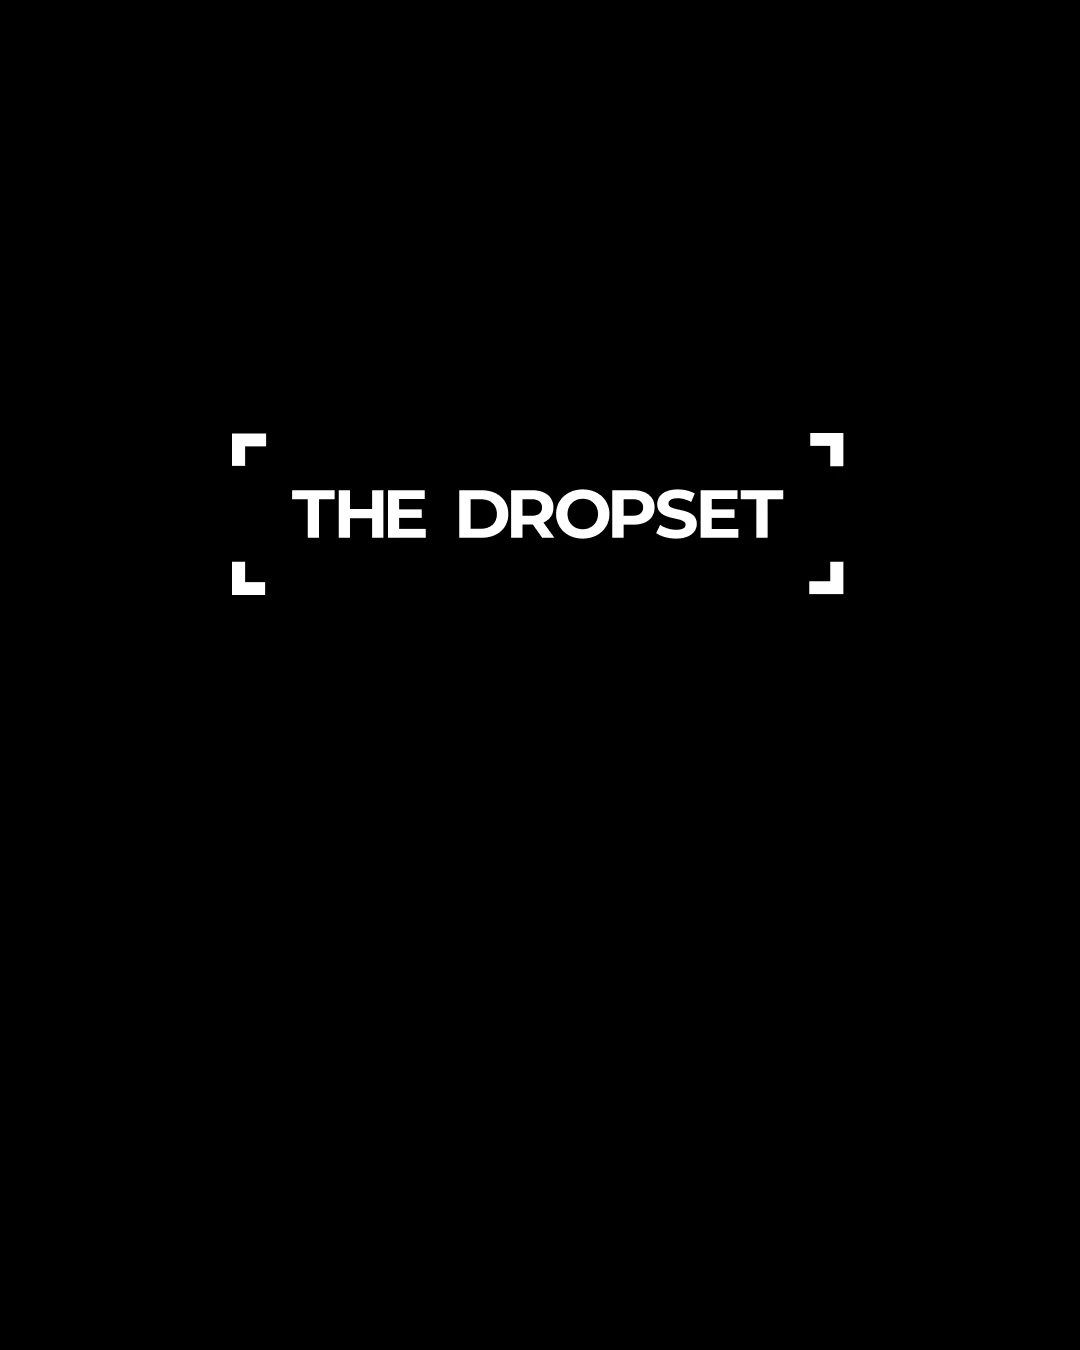 INTRODUCING The Dropset